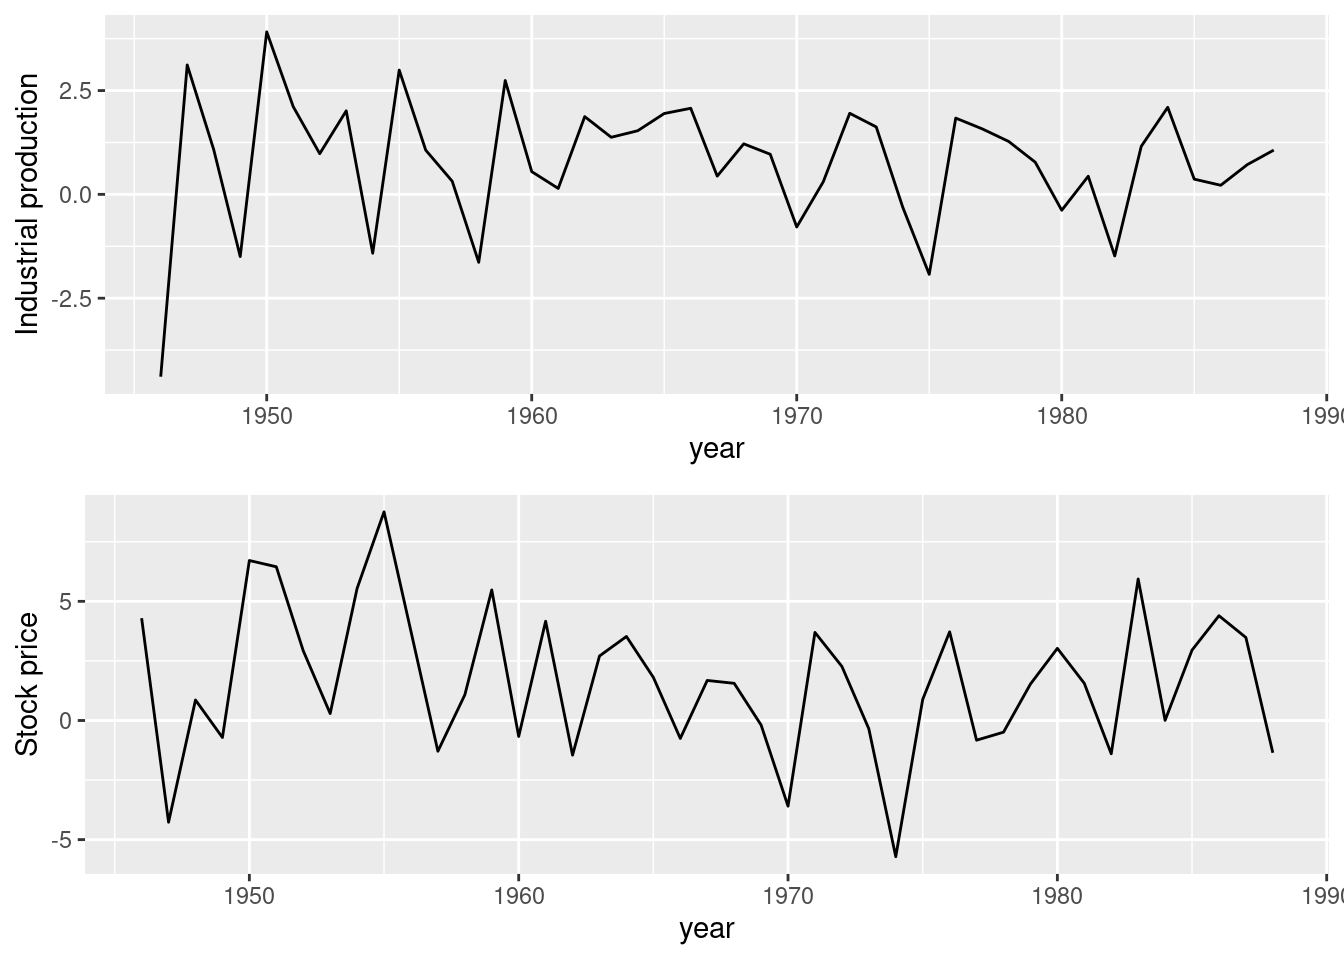 Time series of industrial production and stock prices in the NelPlo dataset.